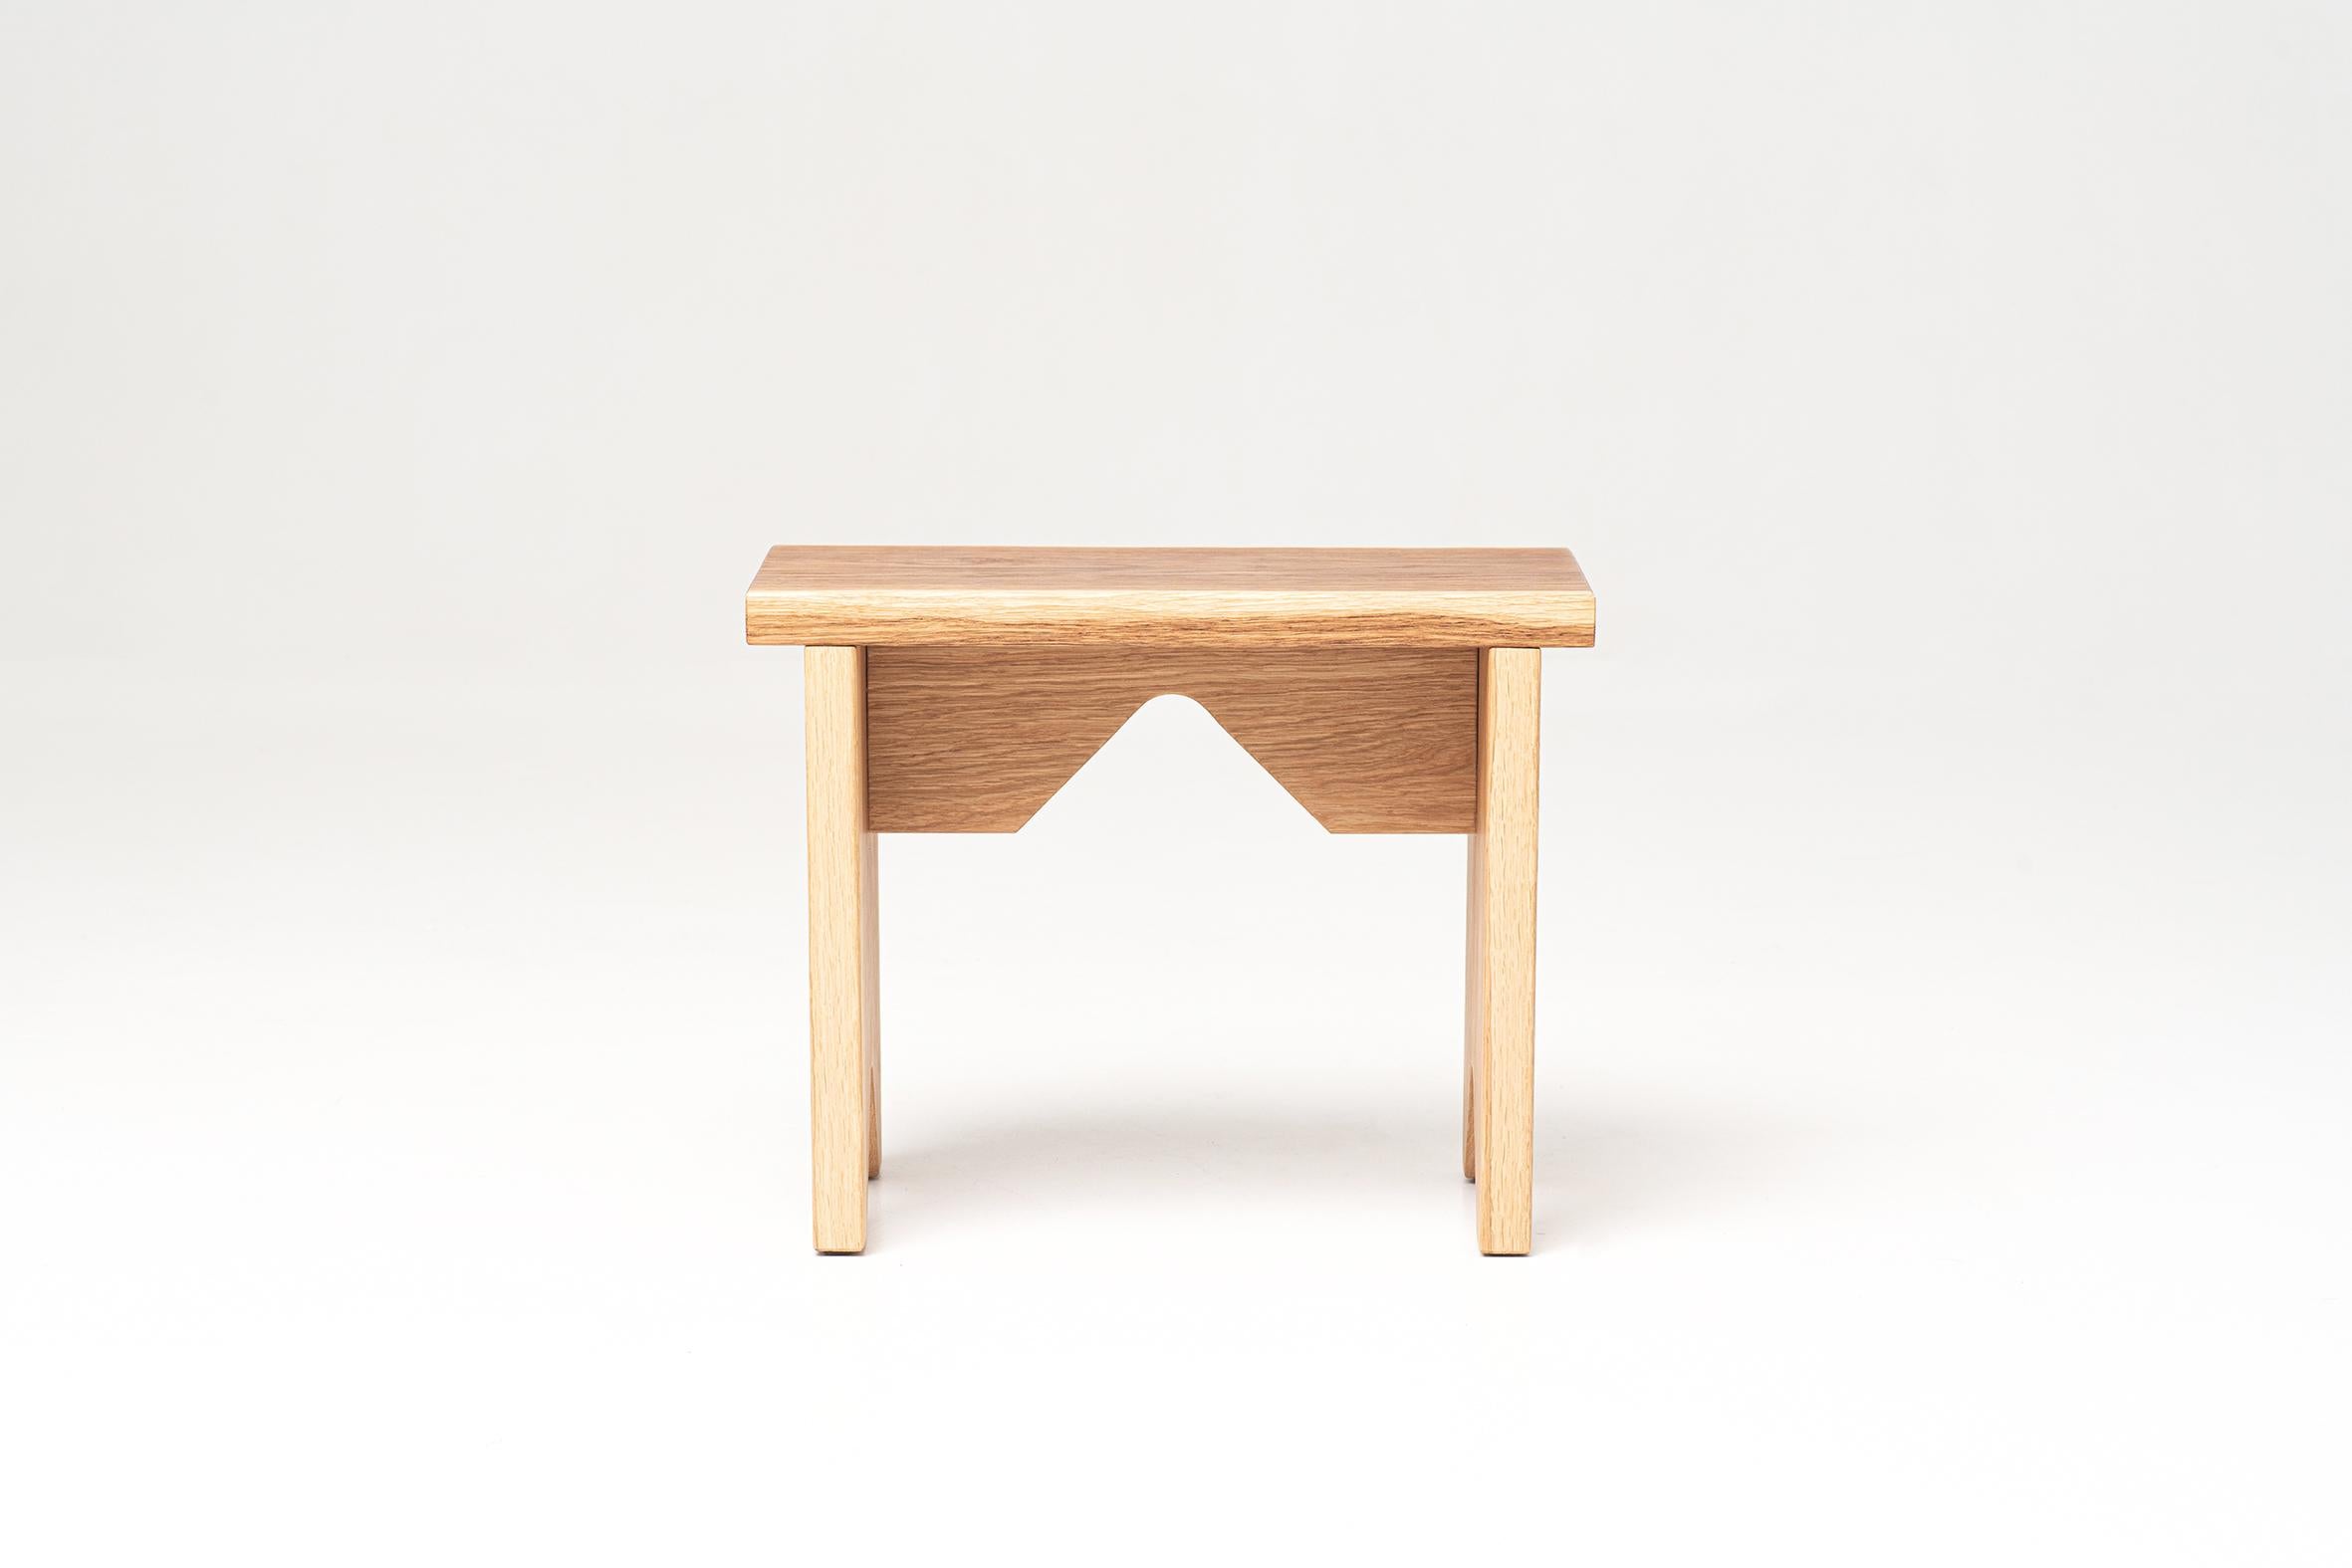 Oslinchik 02 low stool by Oito
Dimensions: D21 x W38 x H30 cm
Materials: Oak wood, wax or paint.
Weight: 4 kg
Also Available in different colours.

Wooden stools are a trend for environmental friendliness and home comfort. We try to make our